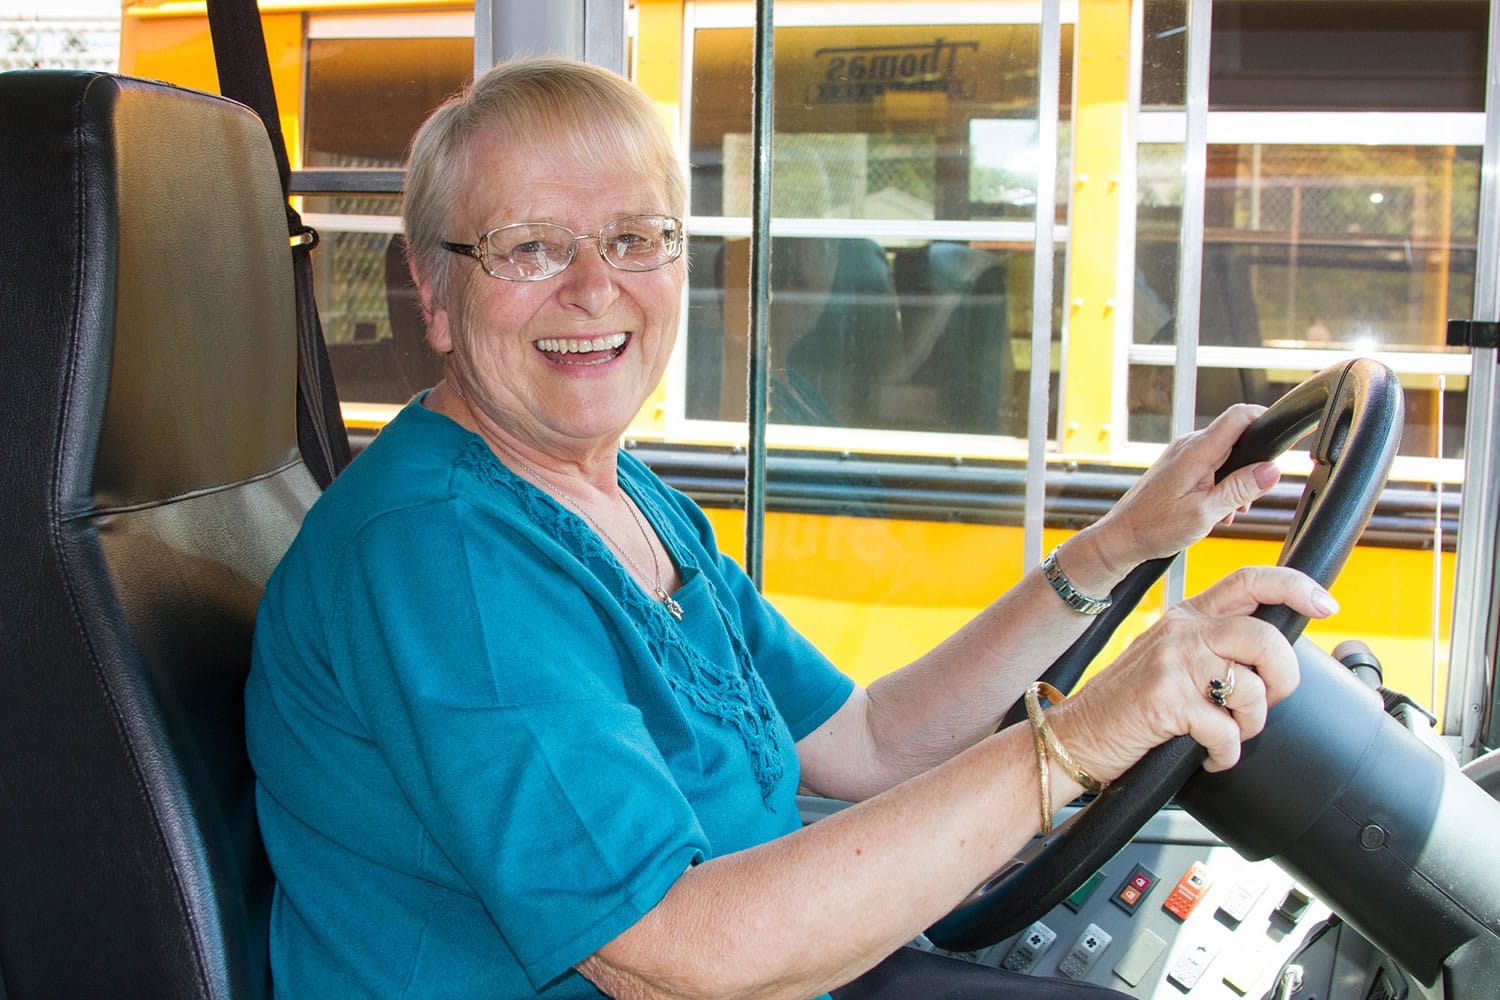 Ridgefield: After 46 years driving a bus for the Ridgefield School District, Beverly Summerhill retired recently after driving about 455,000 miles in her time with the district.